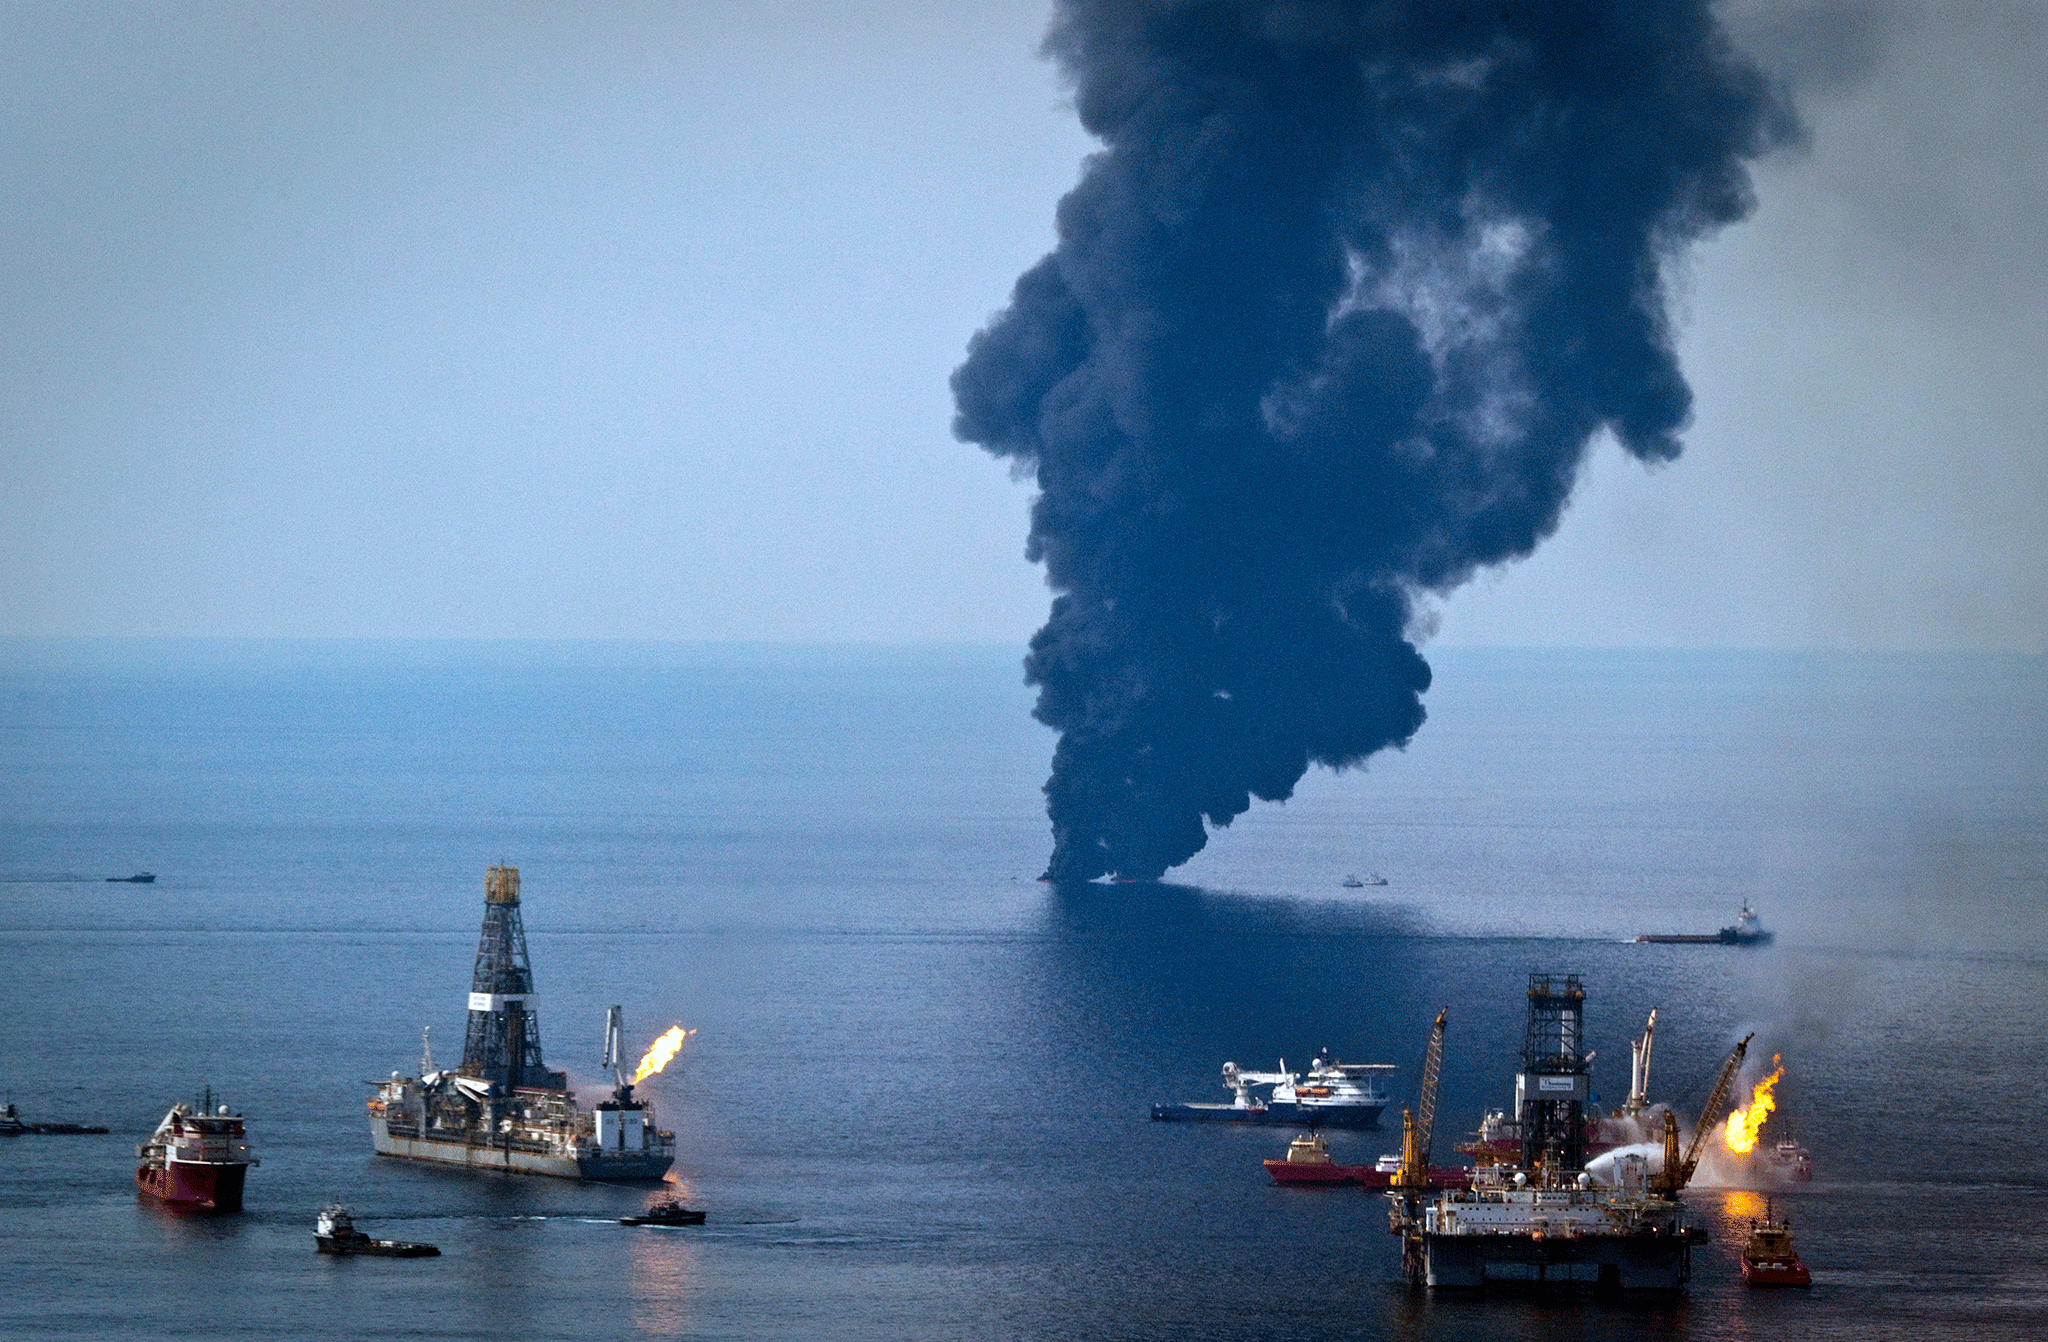 BP's Deepwater Horizon oil rig in the Gulf of Mexico June 2010 - the company capped its liability for the disaster in July at $61.2bn